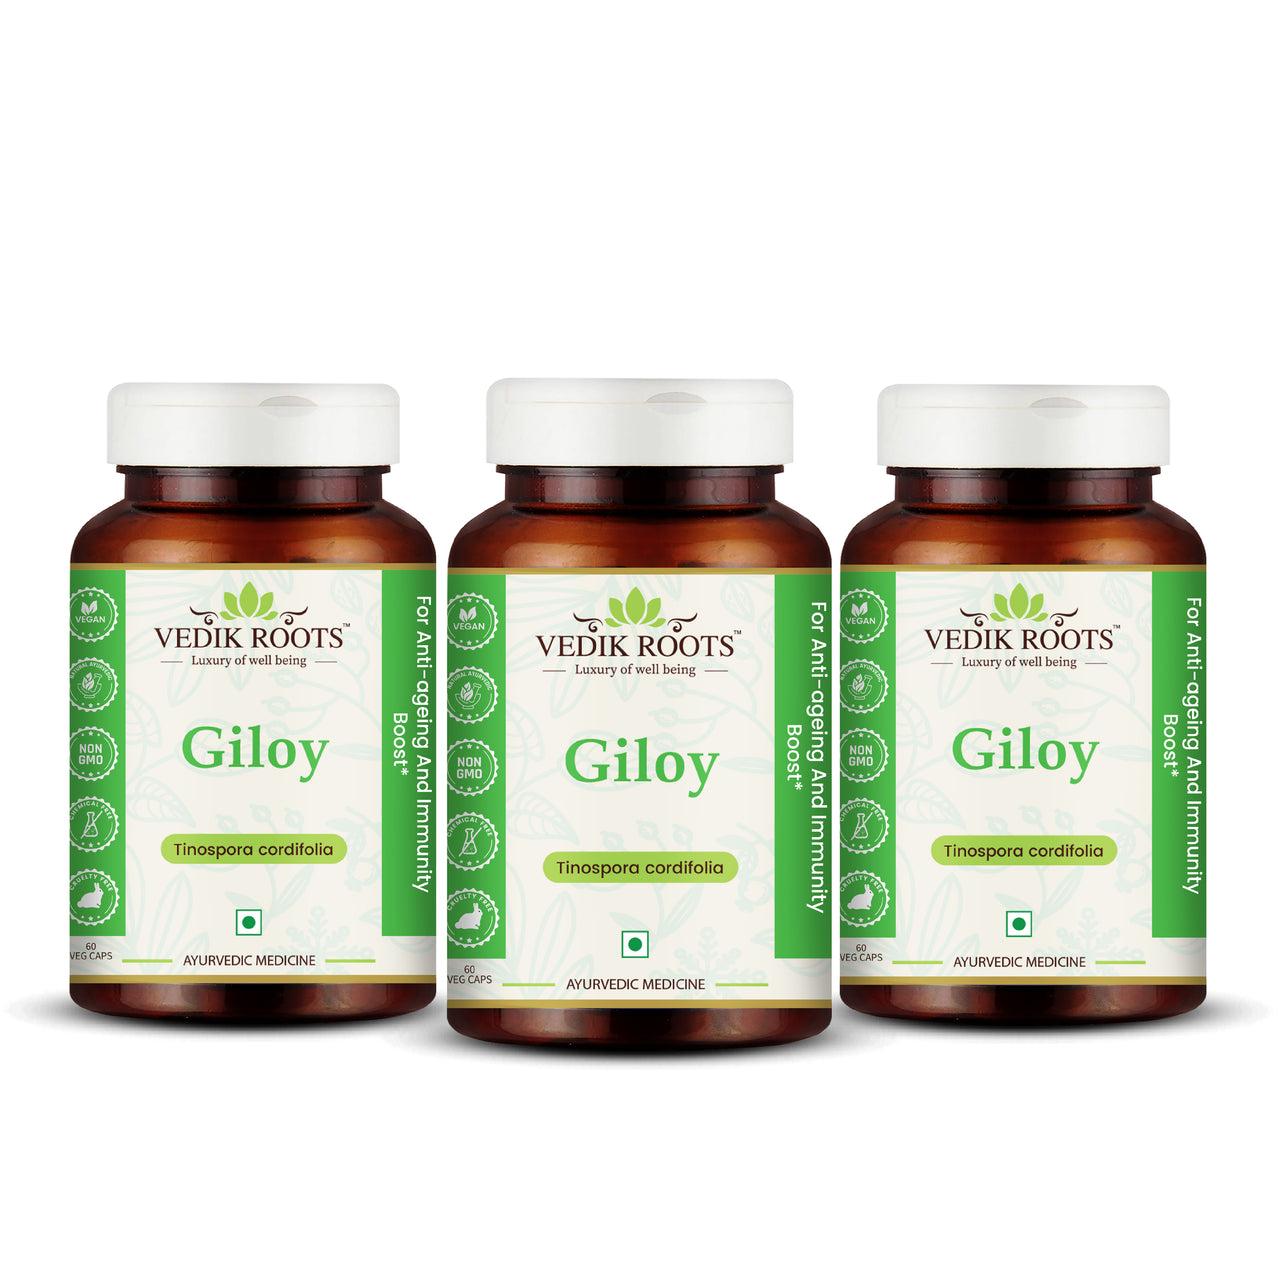 vedikroots giloy capsules pack of three